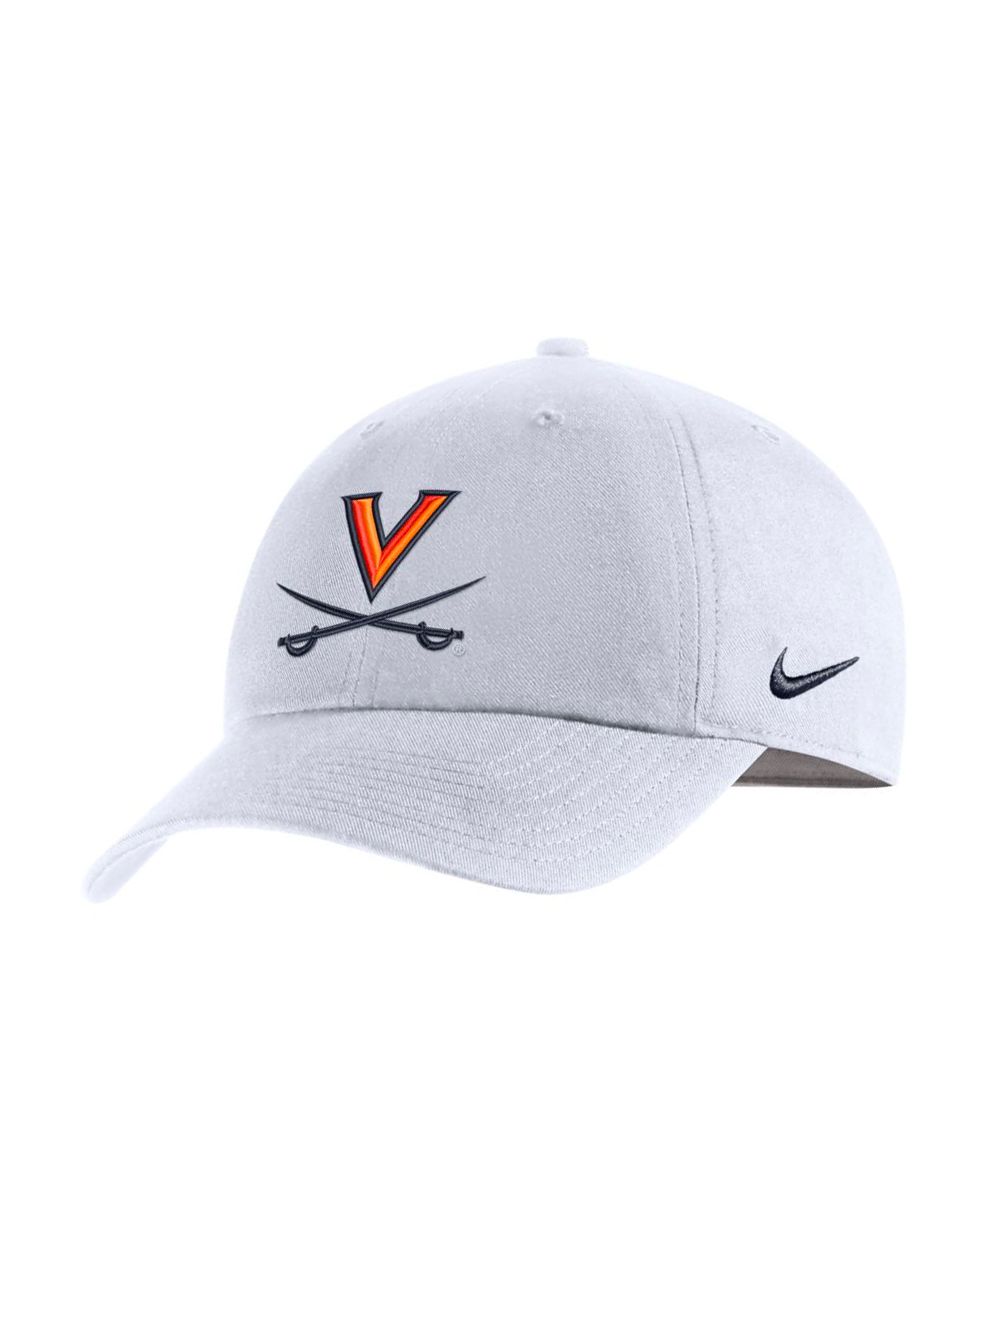 Nike White H86 Authentic Hat - Mincer's of Charlottesville